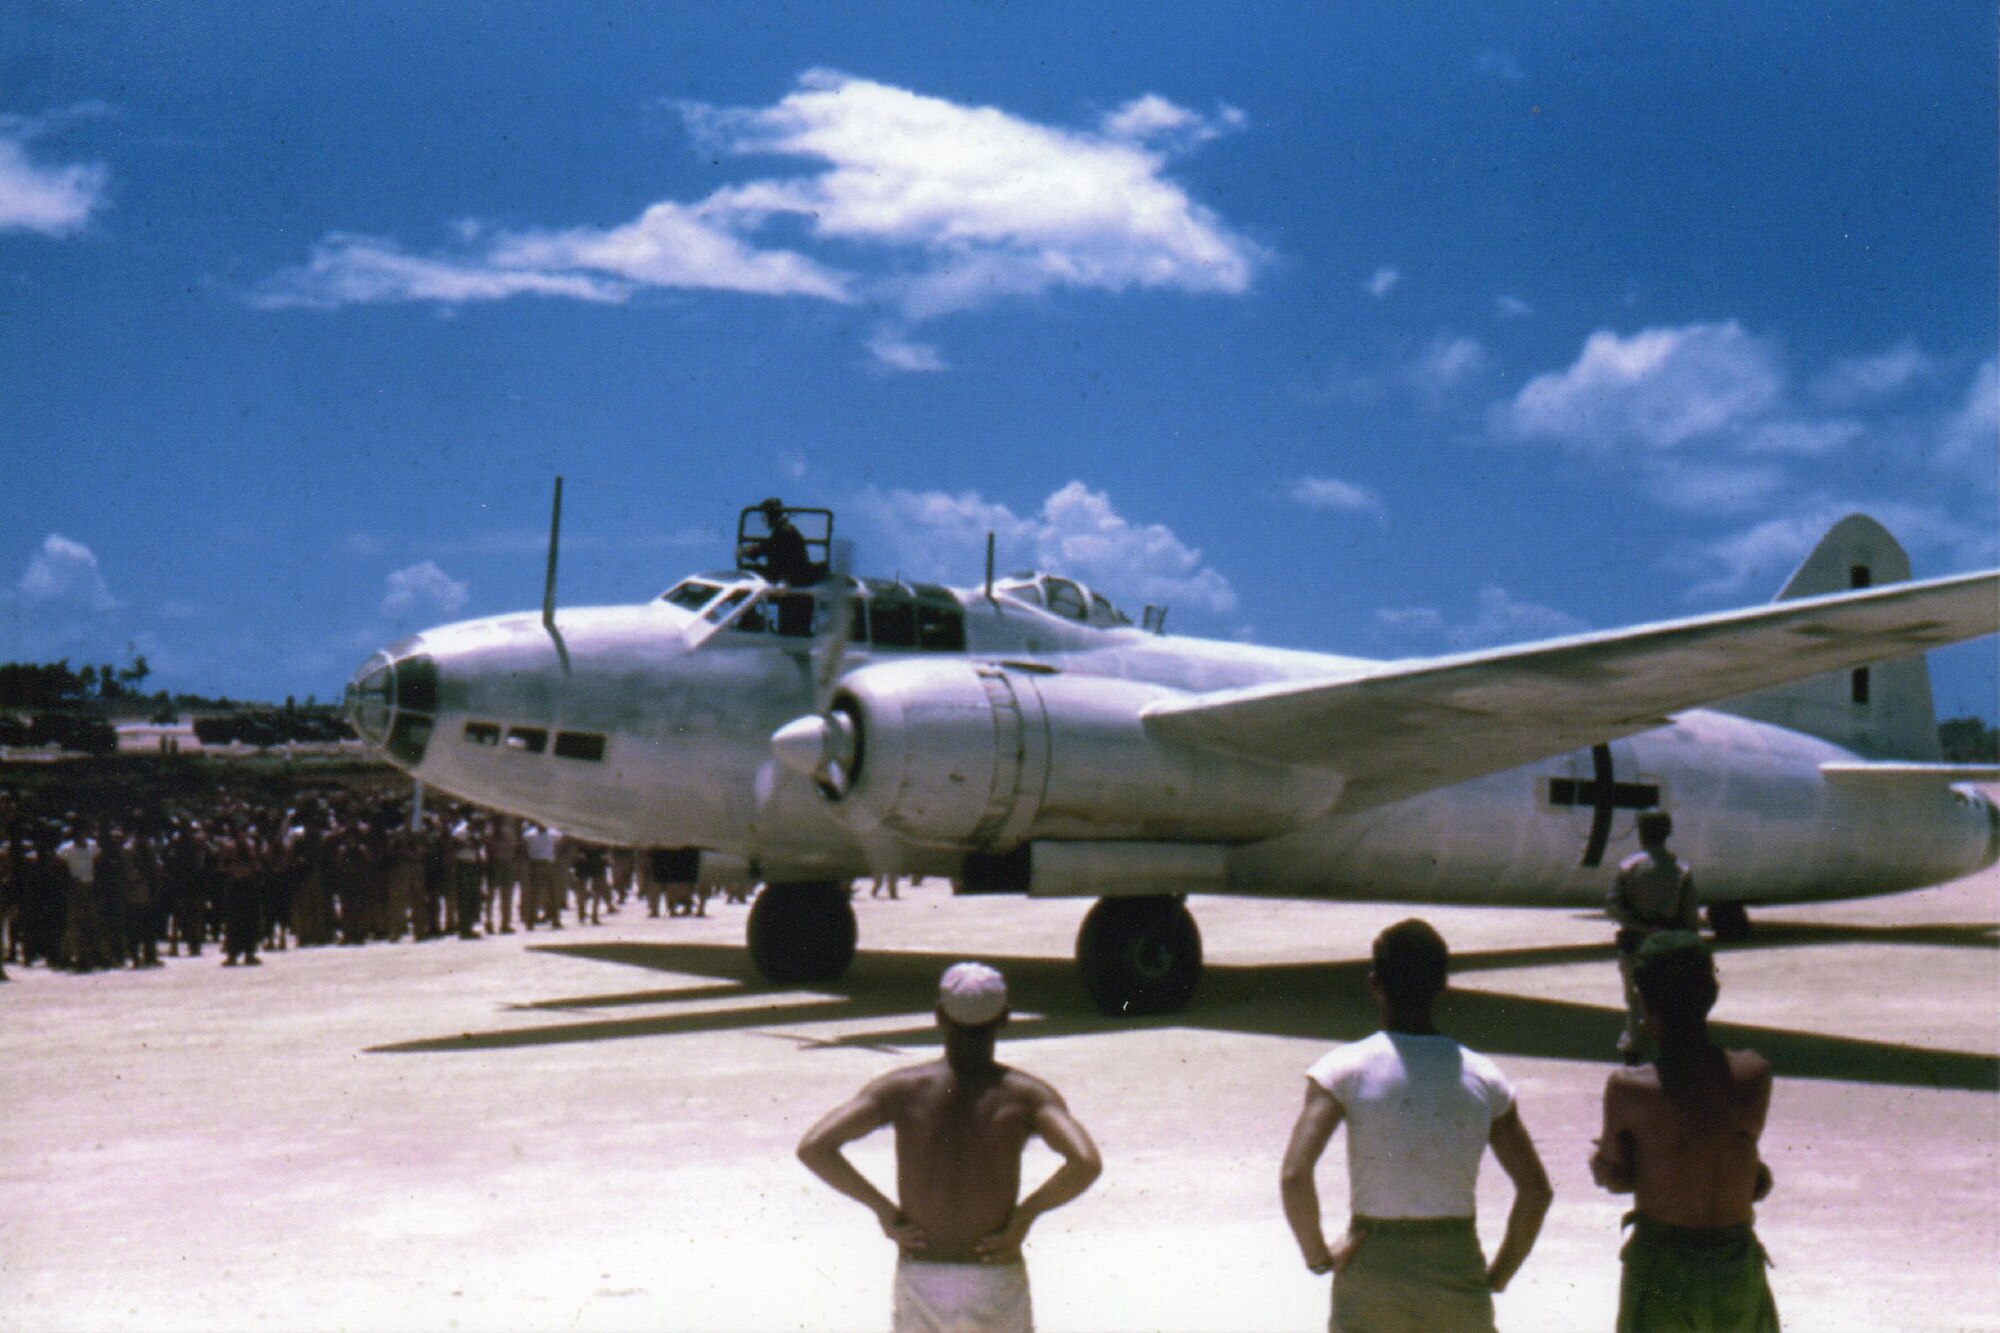 Sgt. Fred Hill captured the momentous arrival of an Imperial Japanese Navy Mitsubishi BETTY bomber on Ie Shima, off the coast of Okinawa, on 19 August 1945. To many servicemen witnessing the event this was clear evidence that the war was indeed over.  (Courtesy Mr. Fred Hill)